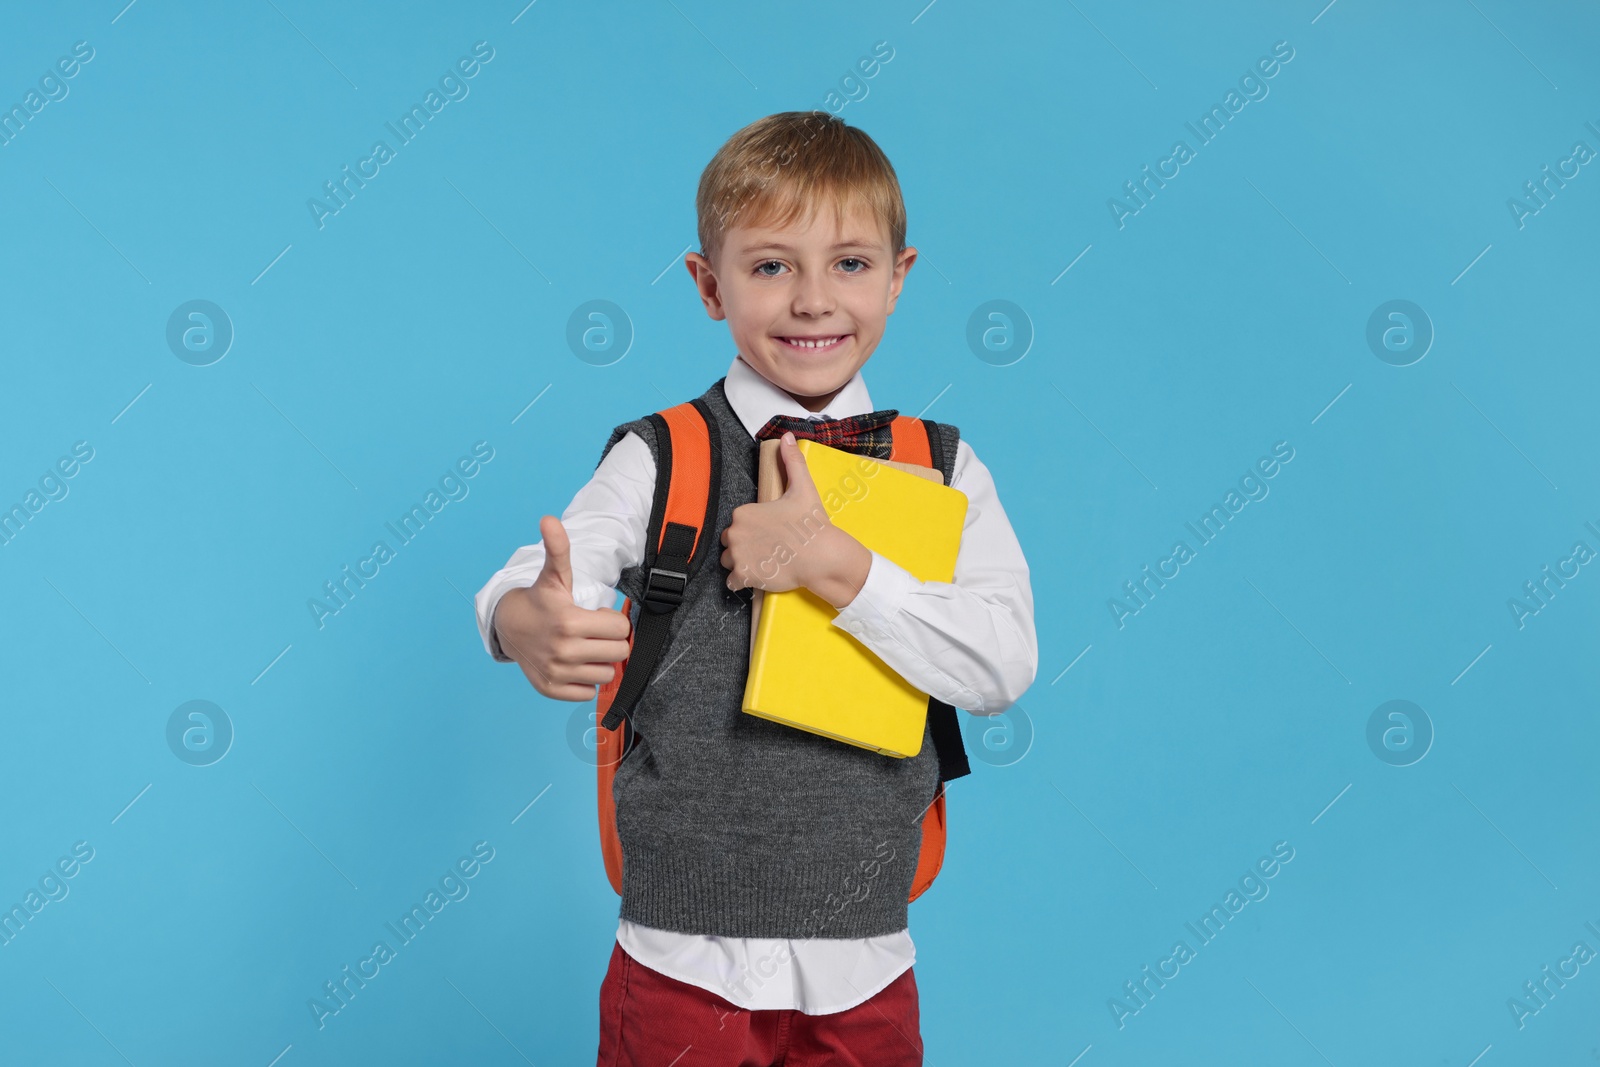 Photo of Happy schoolboy with backpack and books showing thumb up gesture on light blue background